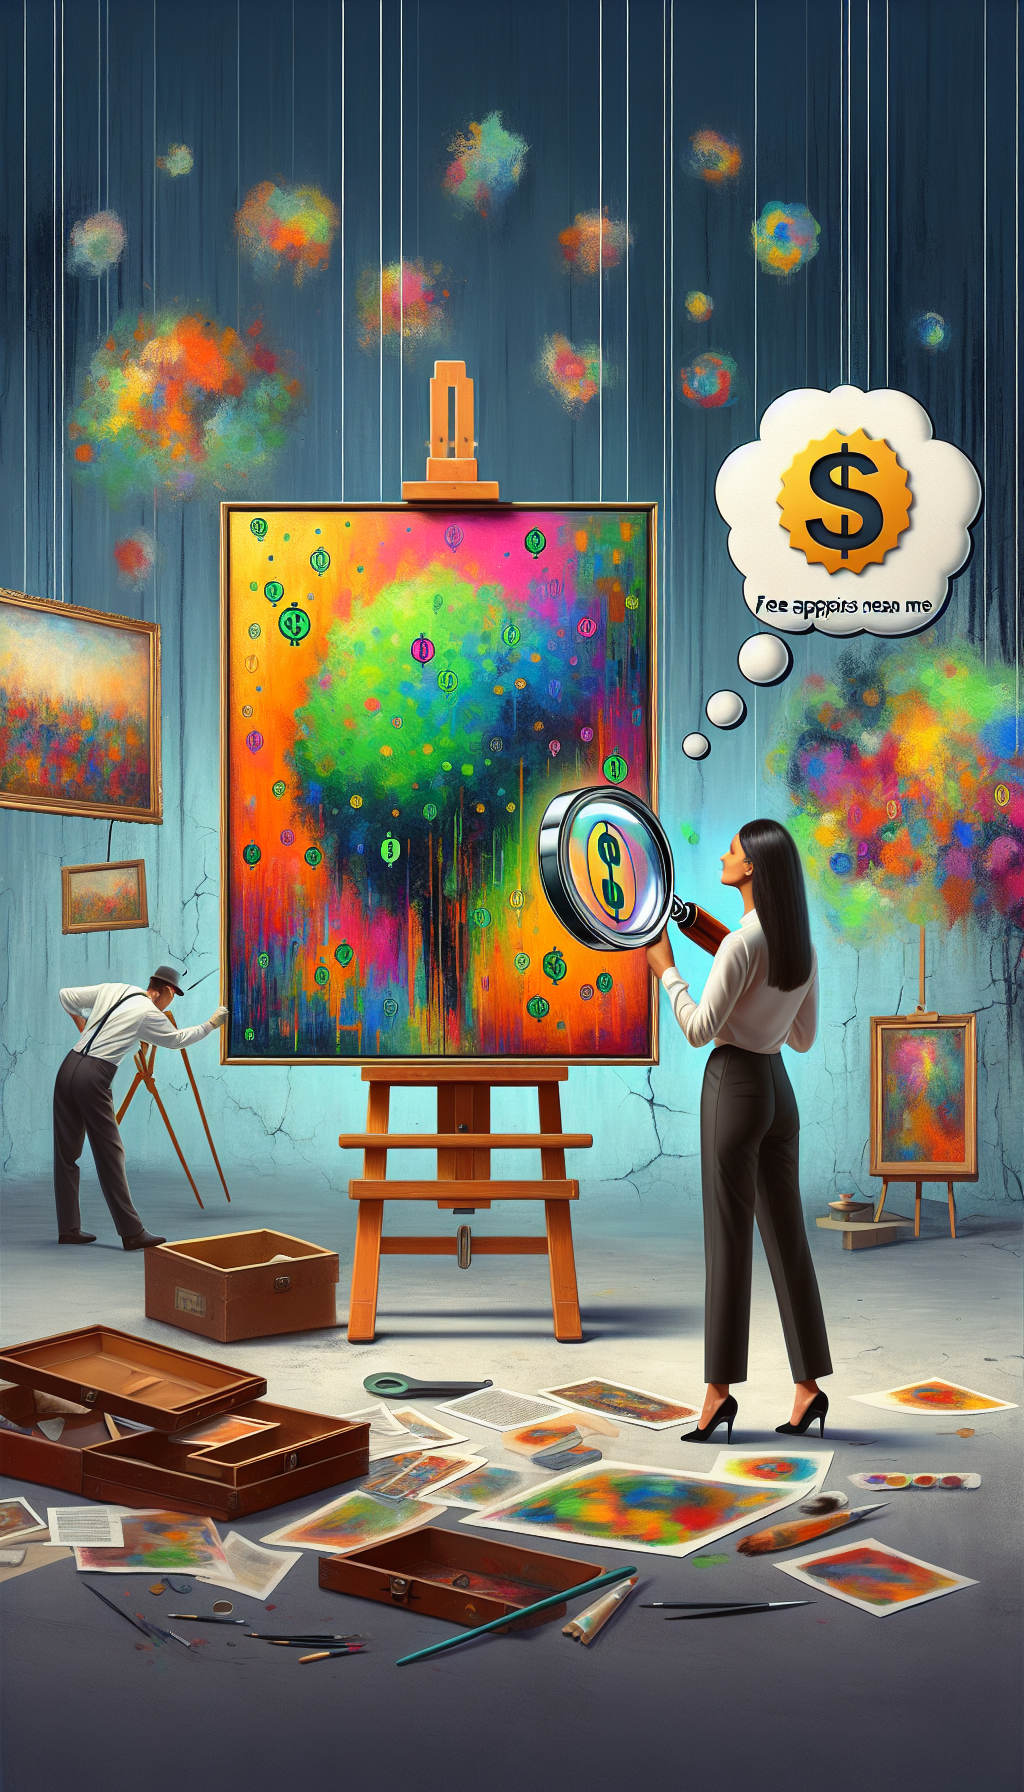 An image featuring a magnifying glass revealing hidden dollar signs and quality stamps within the brushstrokes of a vibrant, abstract painting. A thought bubble from a nearby art enthusiast's head floats above with the phrase "Free Art Appraisers Near Me." The surrounding styles transition from realist detail around the person to impressionistic and surreal surrounding the artwork, embodying the blend of precision and creativity in appraisal.